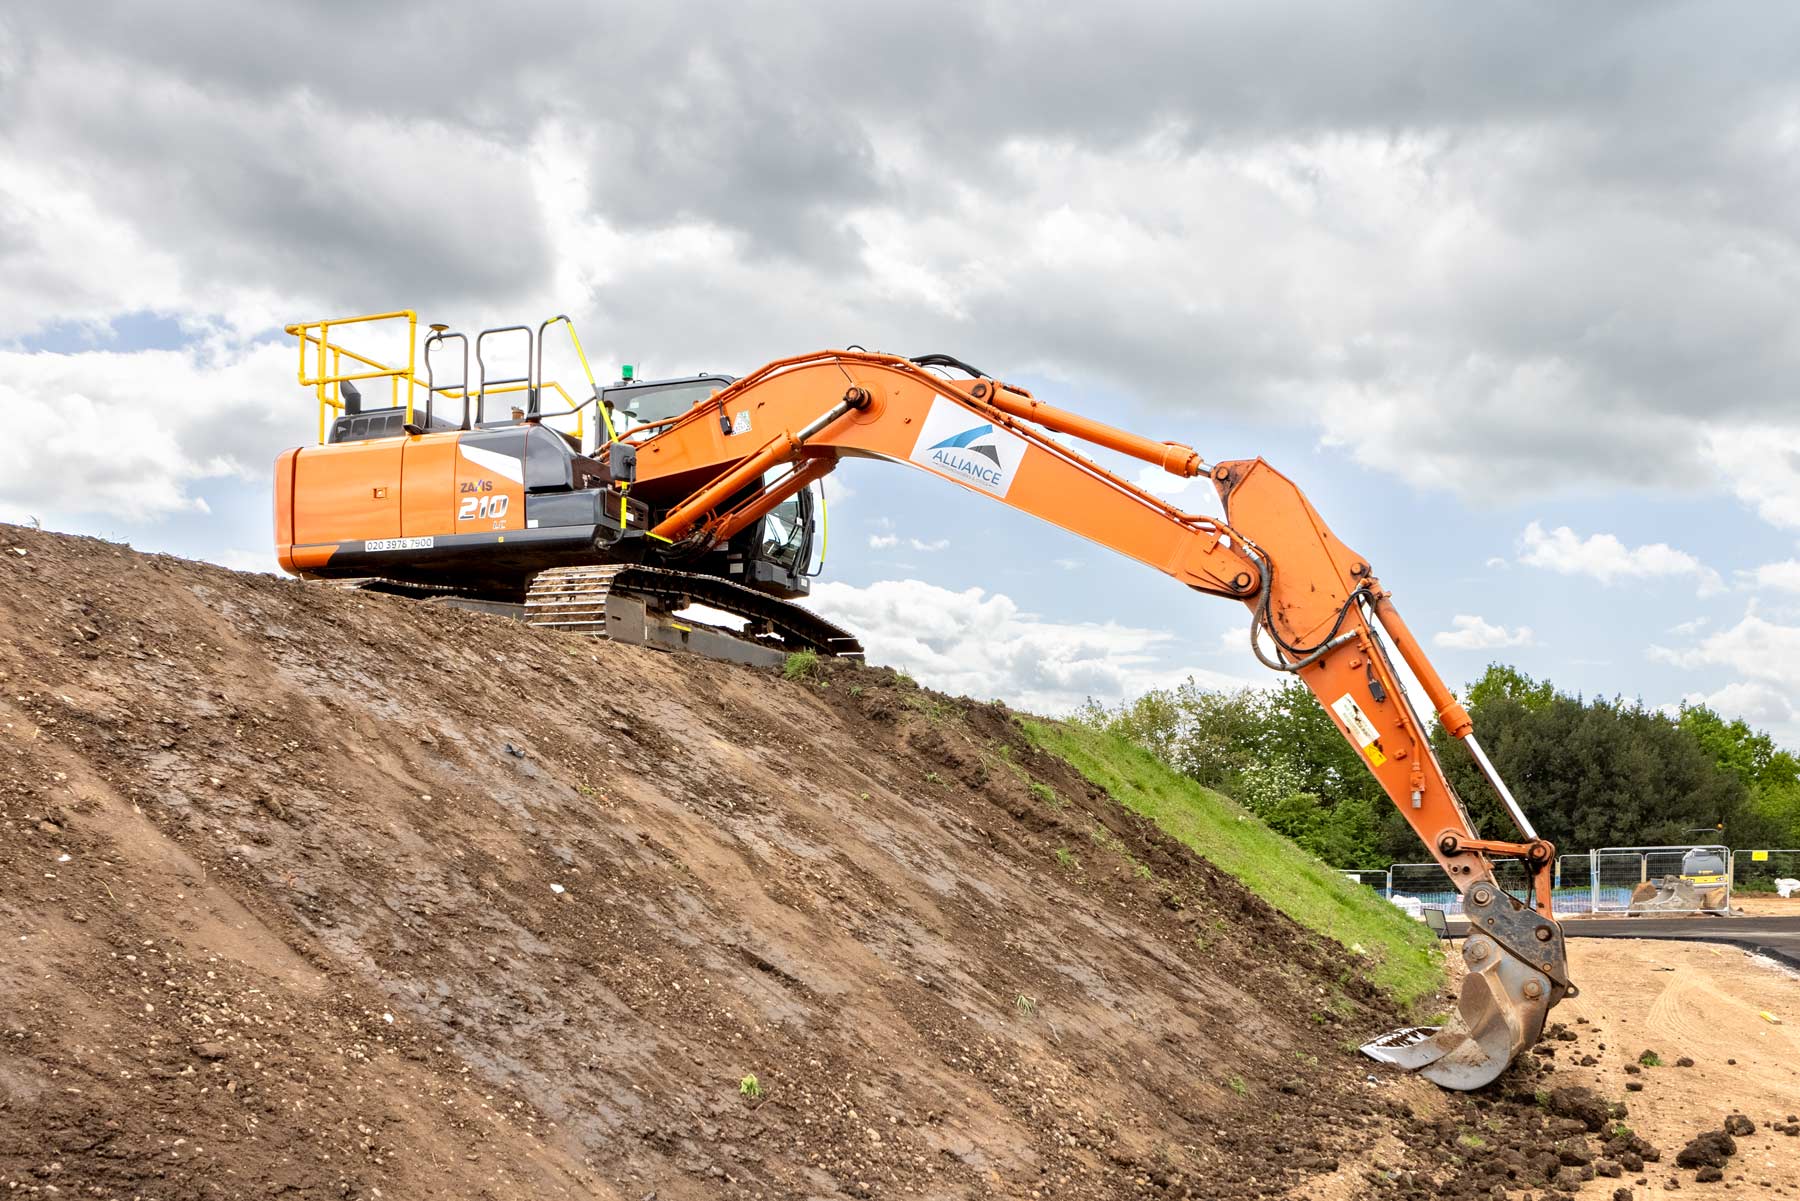 Plant Machinery, the the Hitachi Zaxis 210 at the top of a bank at full stretch